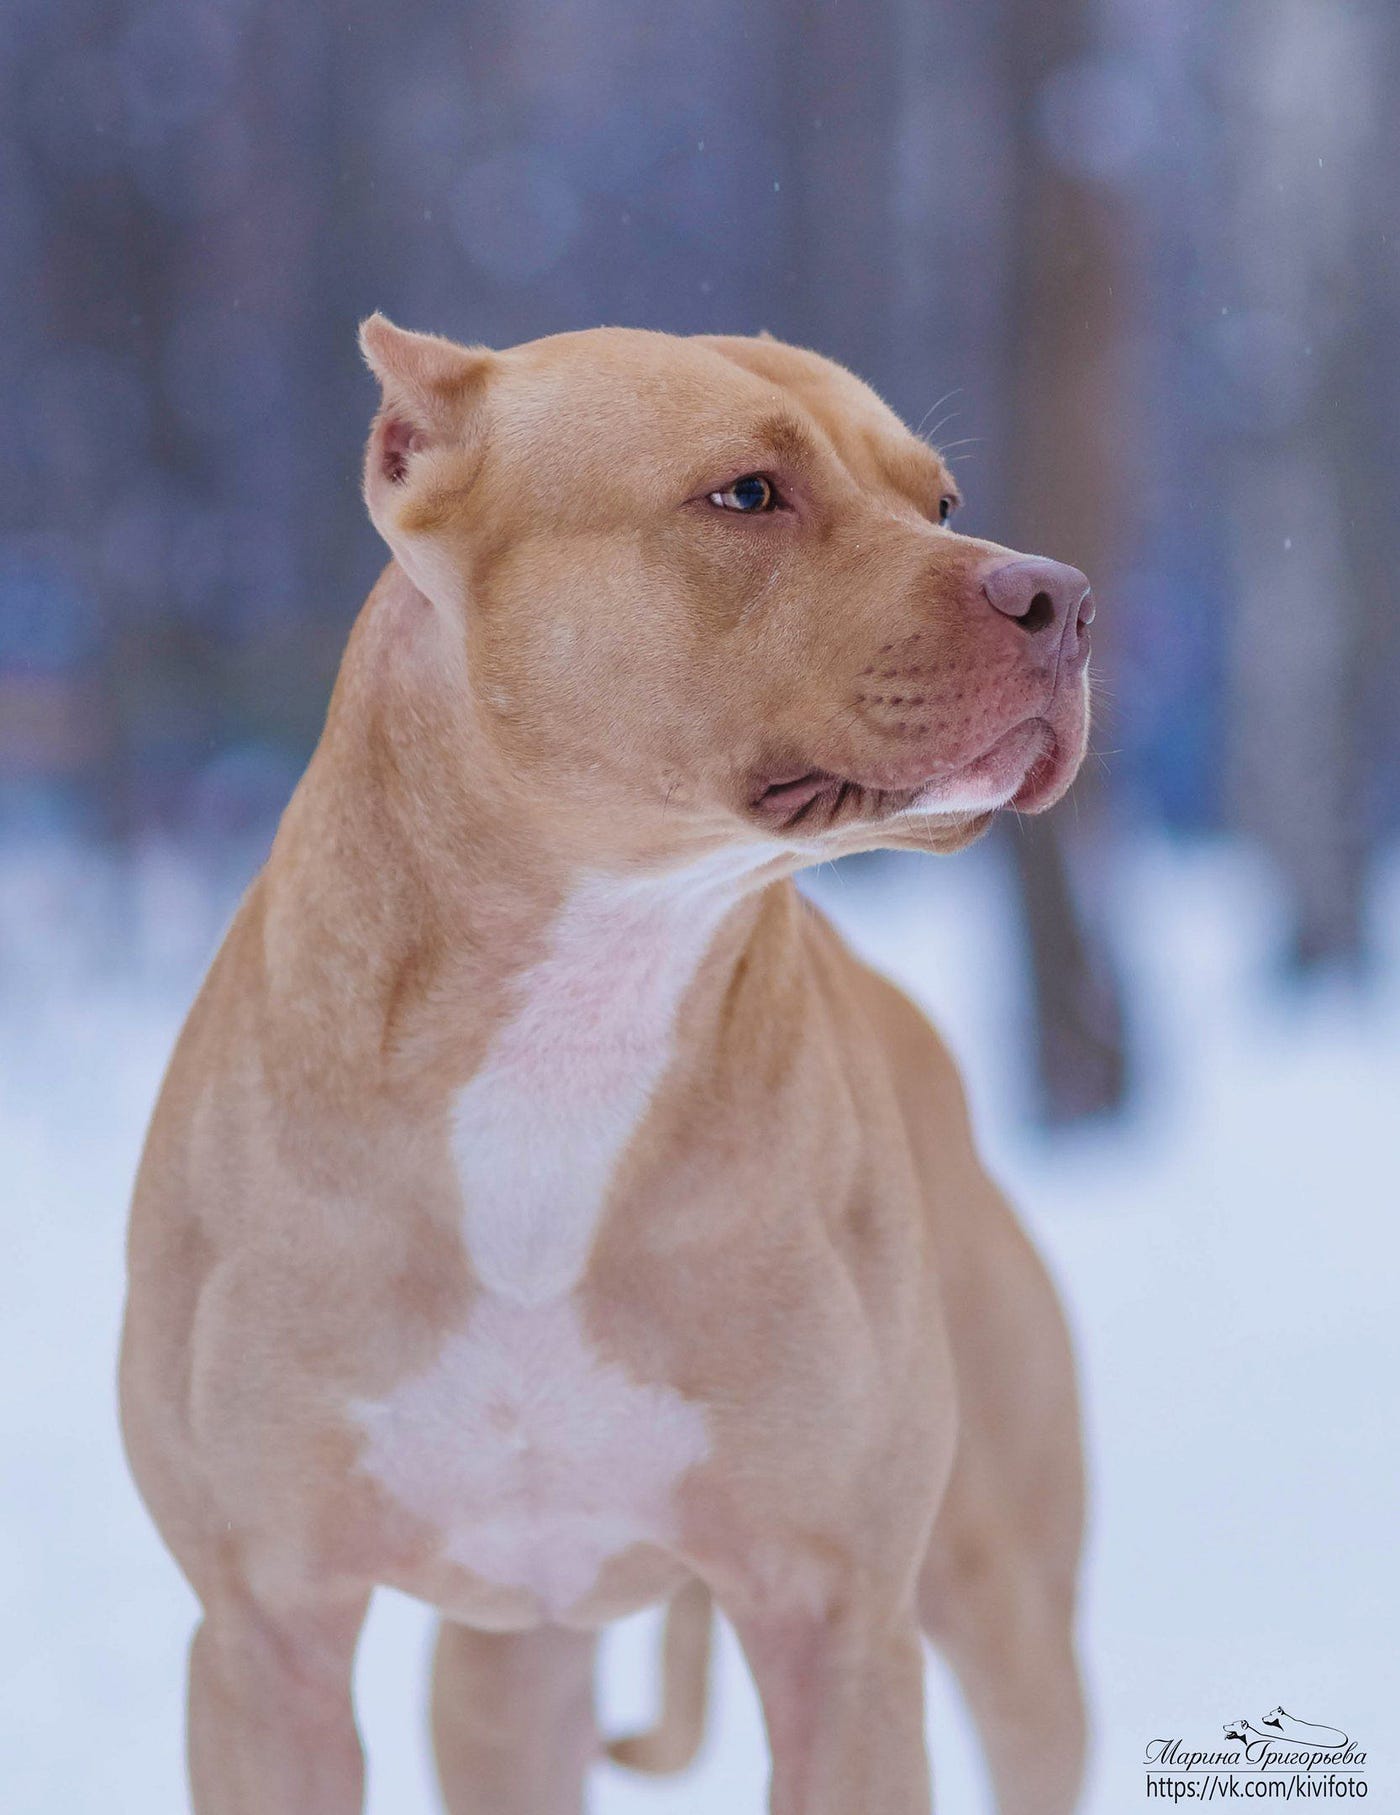 Pit bulls: are they really dangerous?